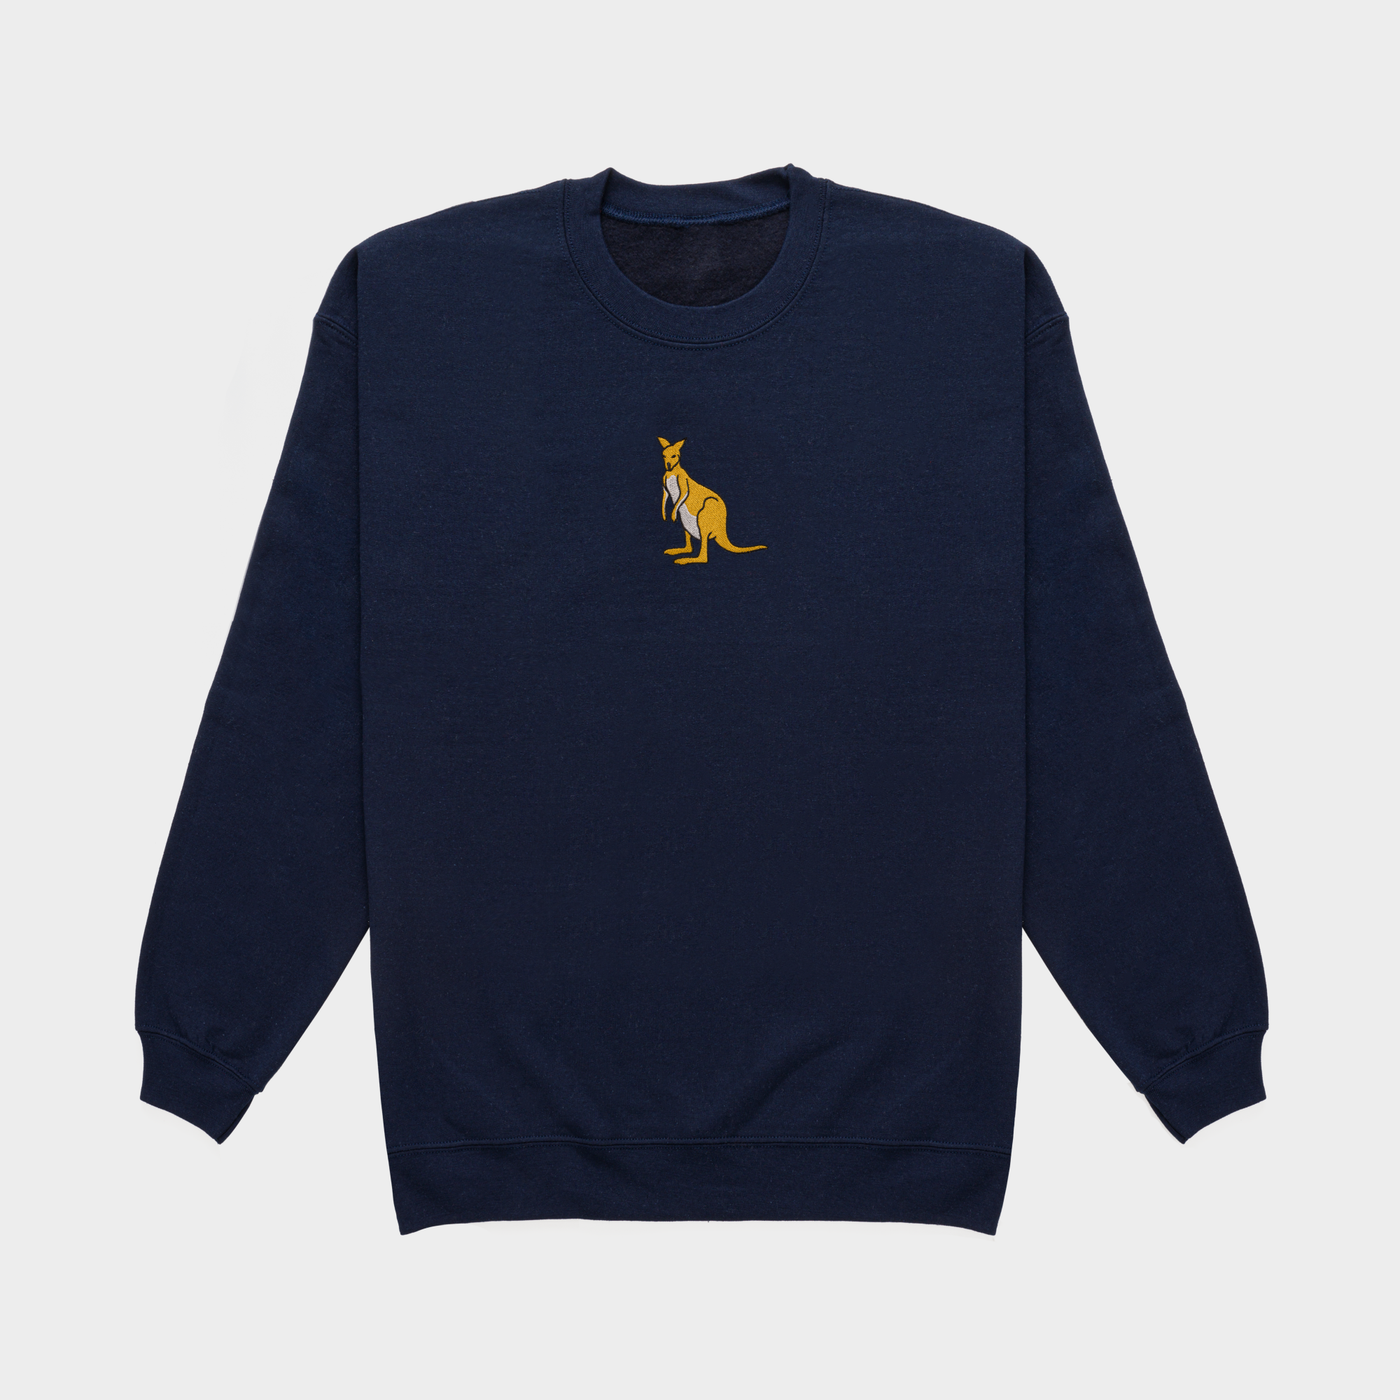 Bobby's Planet Women's Embroidered Kangaroo Sweatshirt from Australia Down Under Animals Collection in Navy Color#color_navy